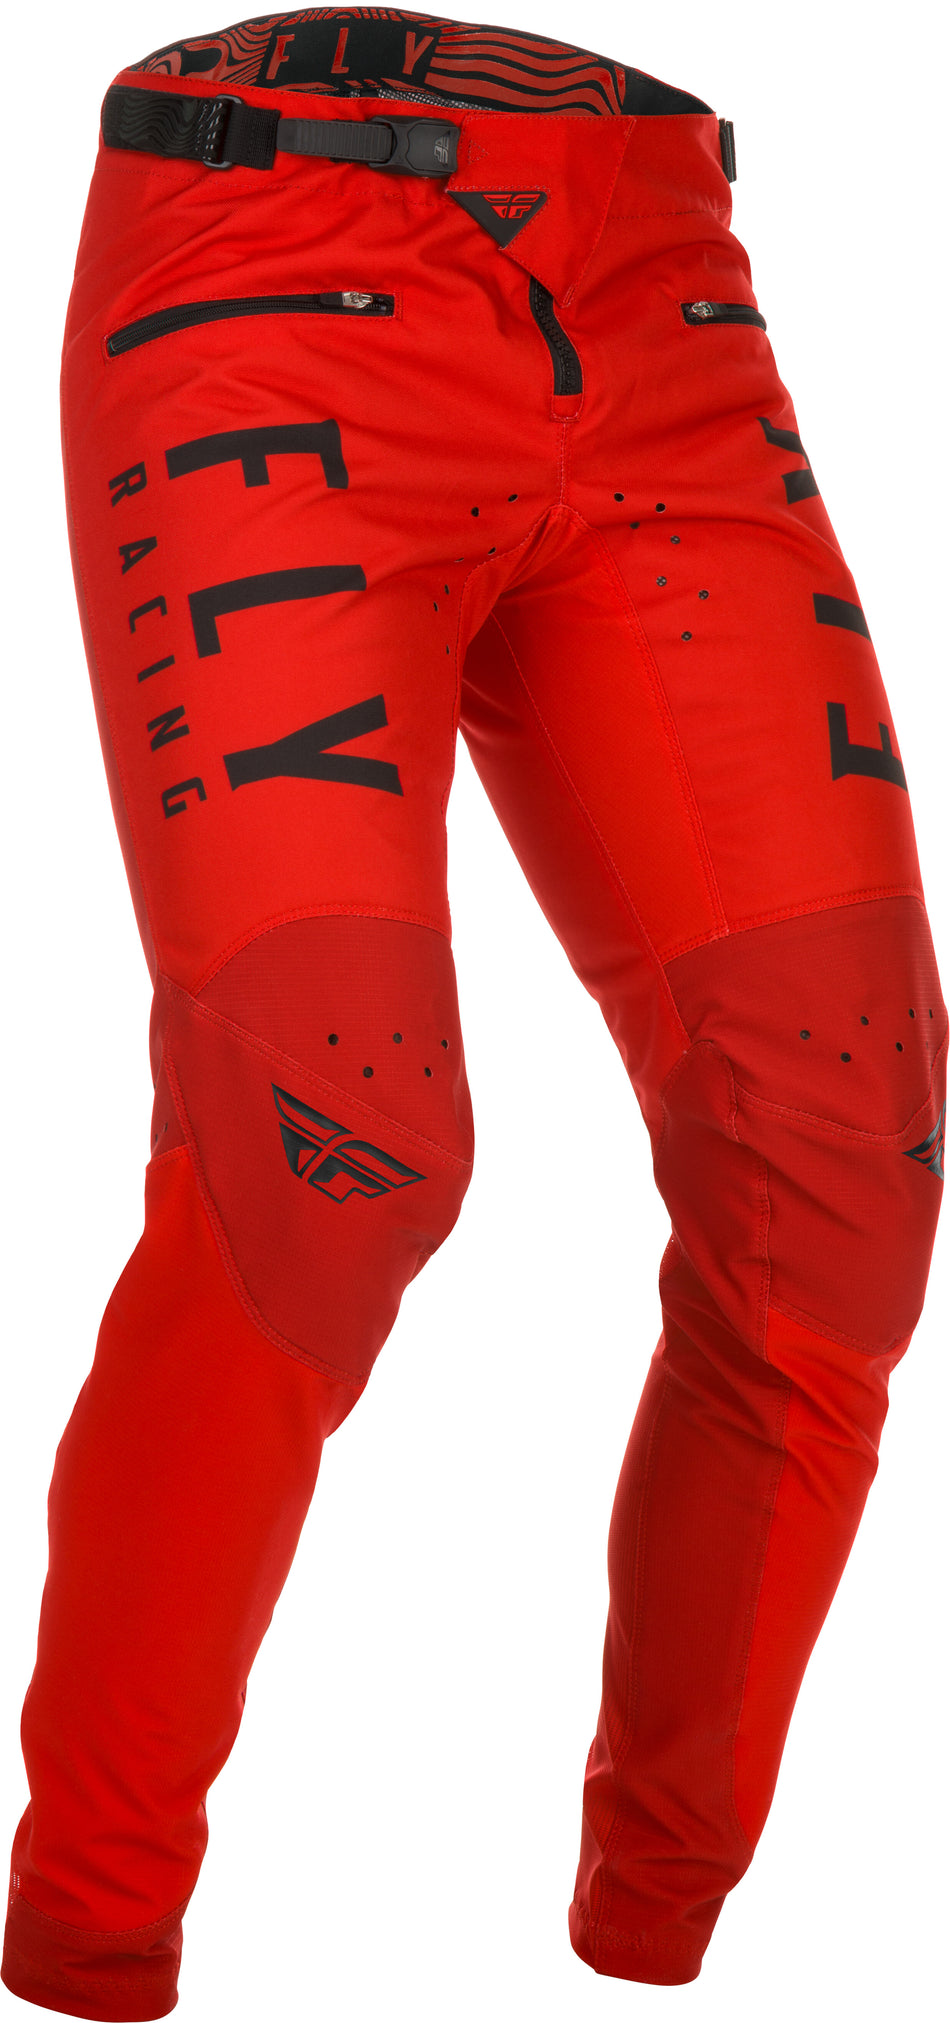 FLY RACING Youth Kinetic Bicycle Pants Red Sz 20 374-04320